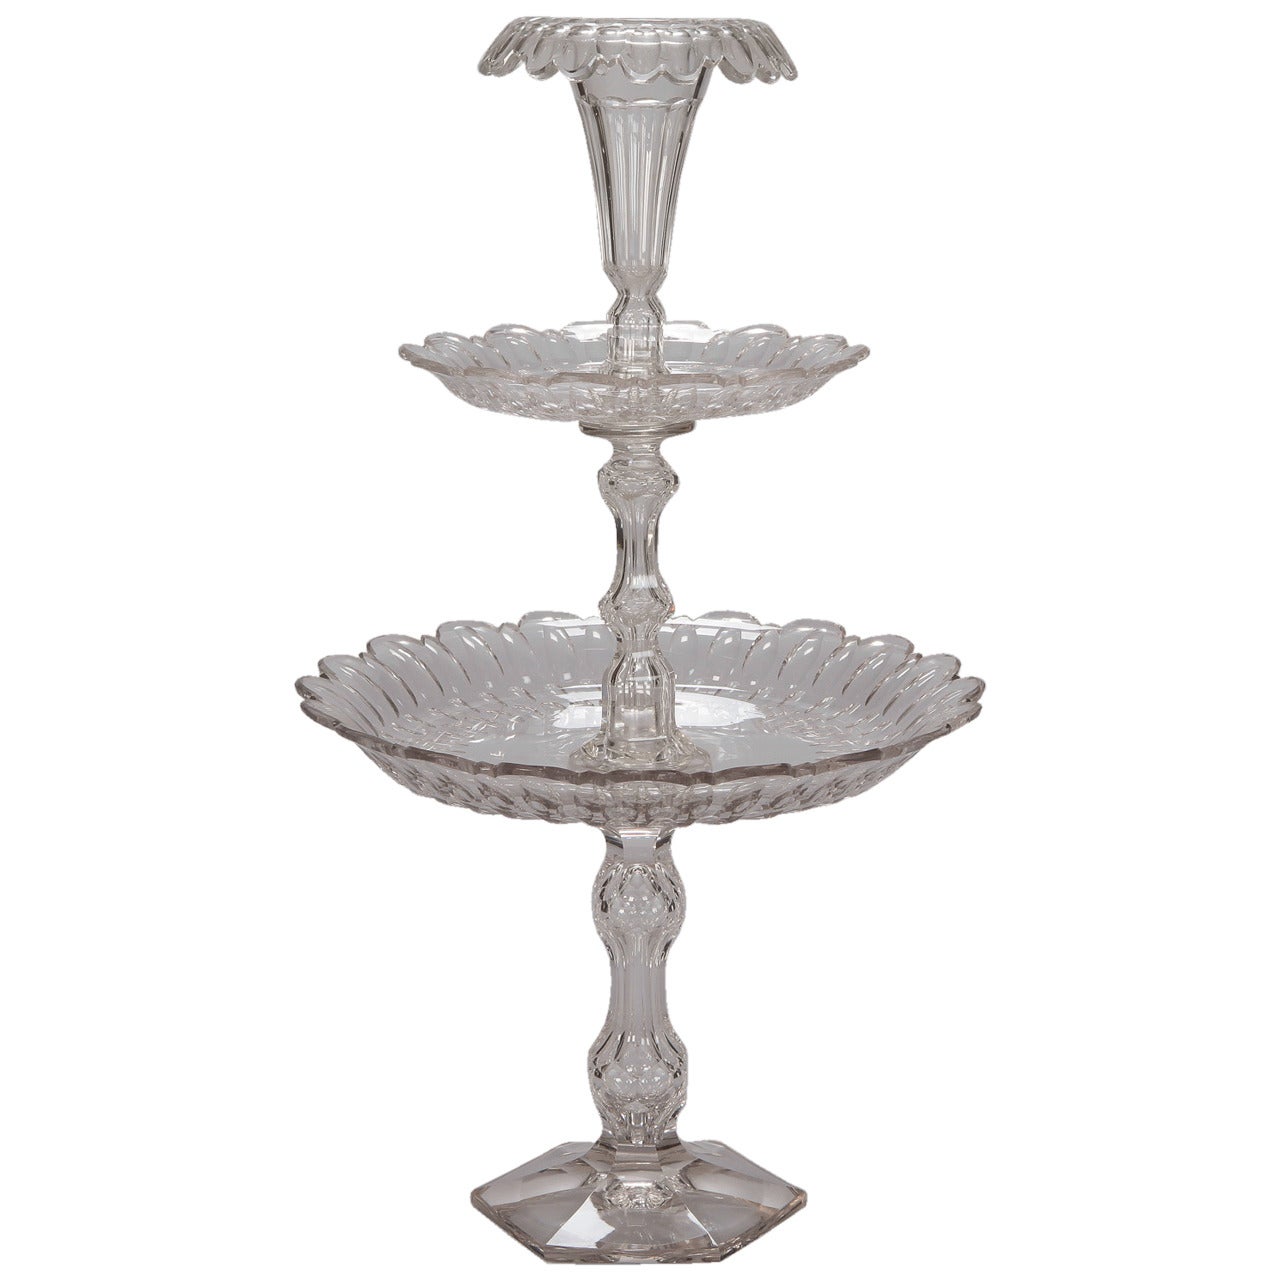 Tall Cut Crystal English Tiered Centerpiece